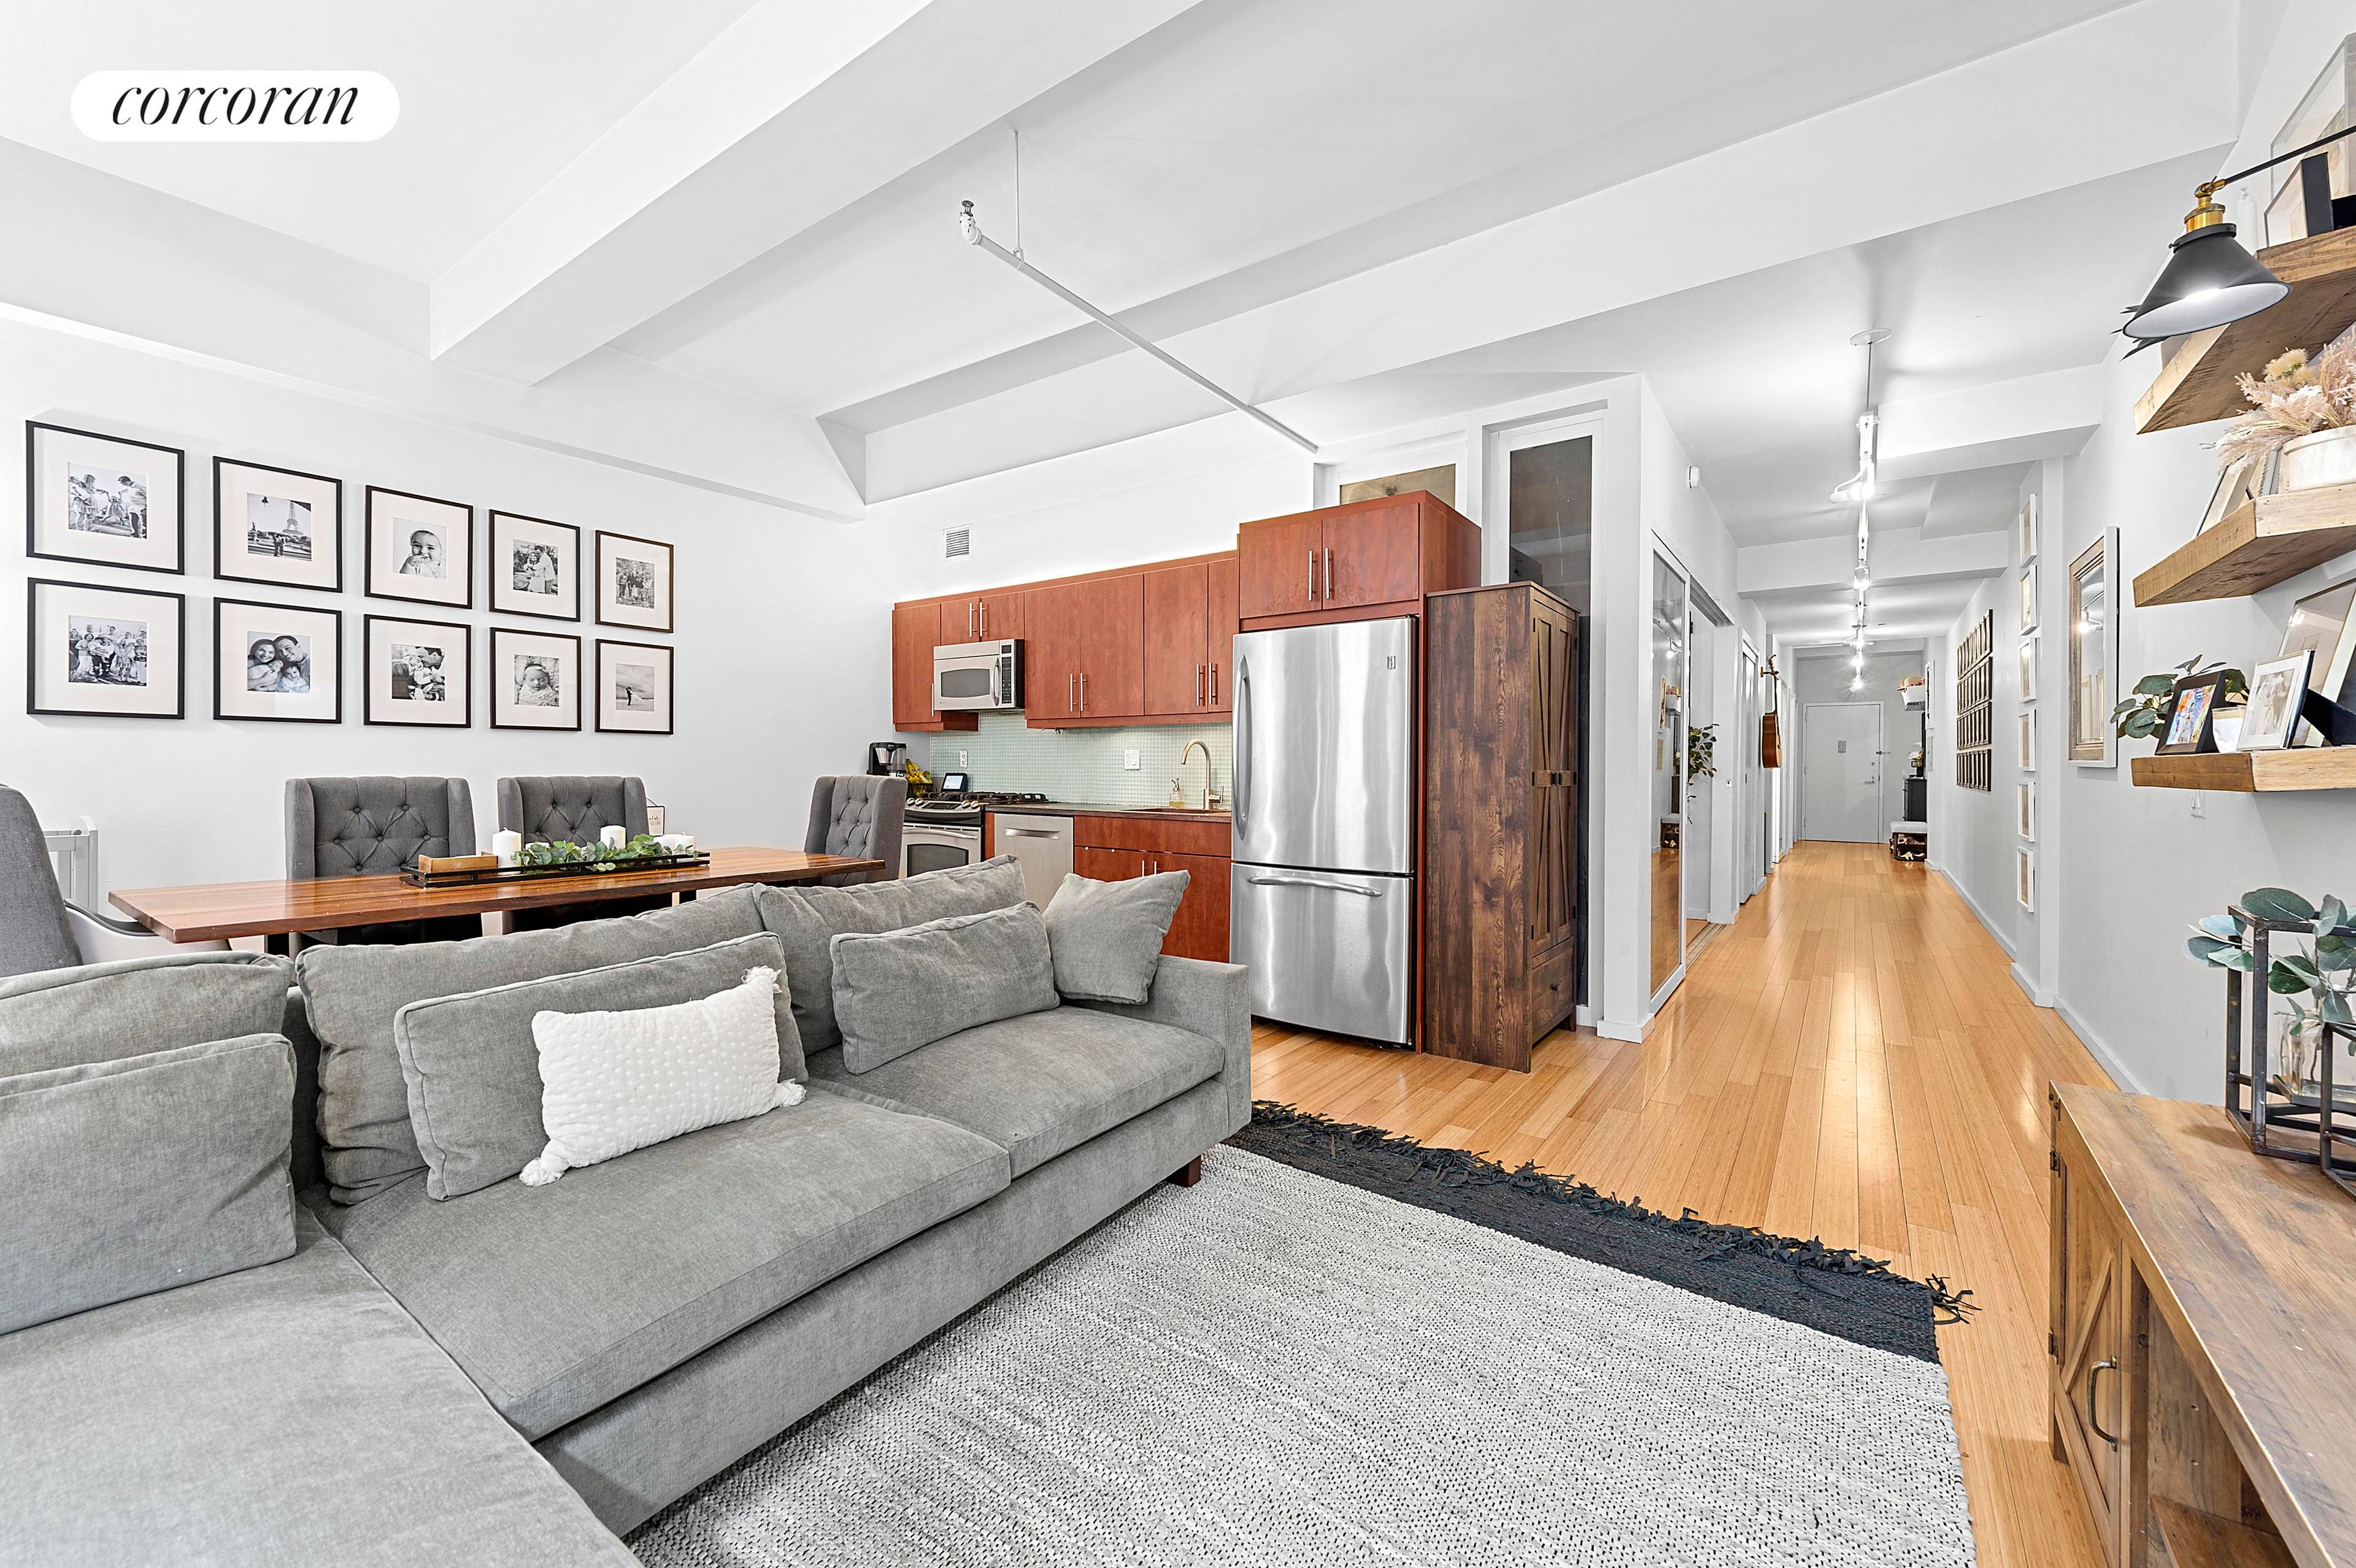 No fee. Luxurious 1, 300 square foot loft style apartment in a Pre War Art Deco landmark building boasts 3 home occupancy rooms sleeping rooms, 2 full spa like bathrooms, ...